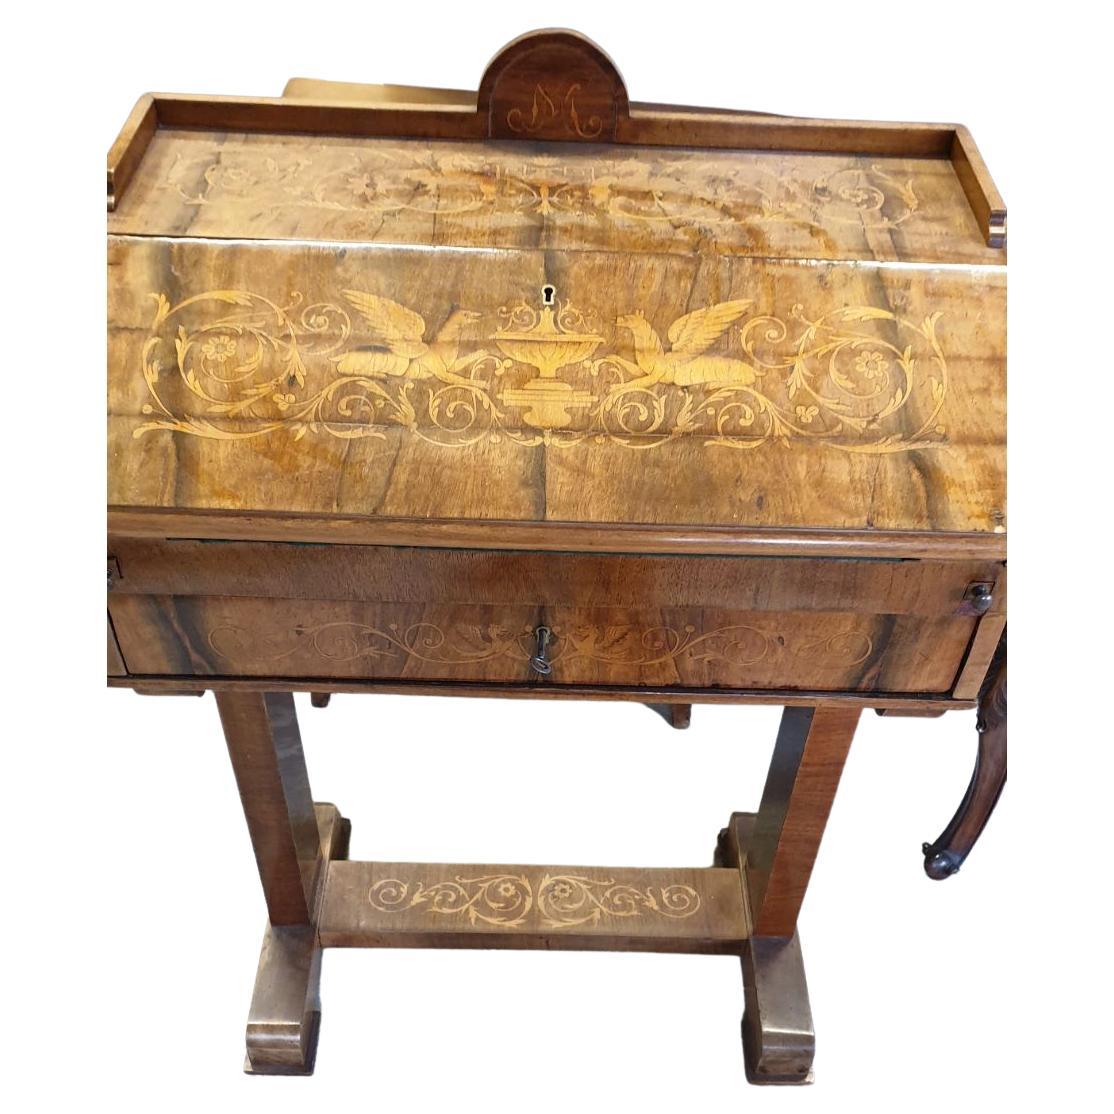 We present to you this special small secretaire table in Biedermeier style.
This piece of furniture is richly decorated with fine marquetry.
With its elegant silhouette and beautiful patina, this 20th-century Biedermeier era small table secretaire